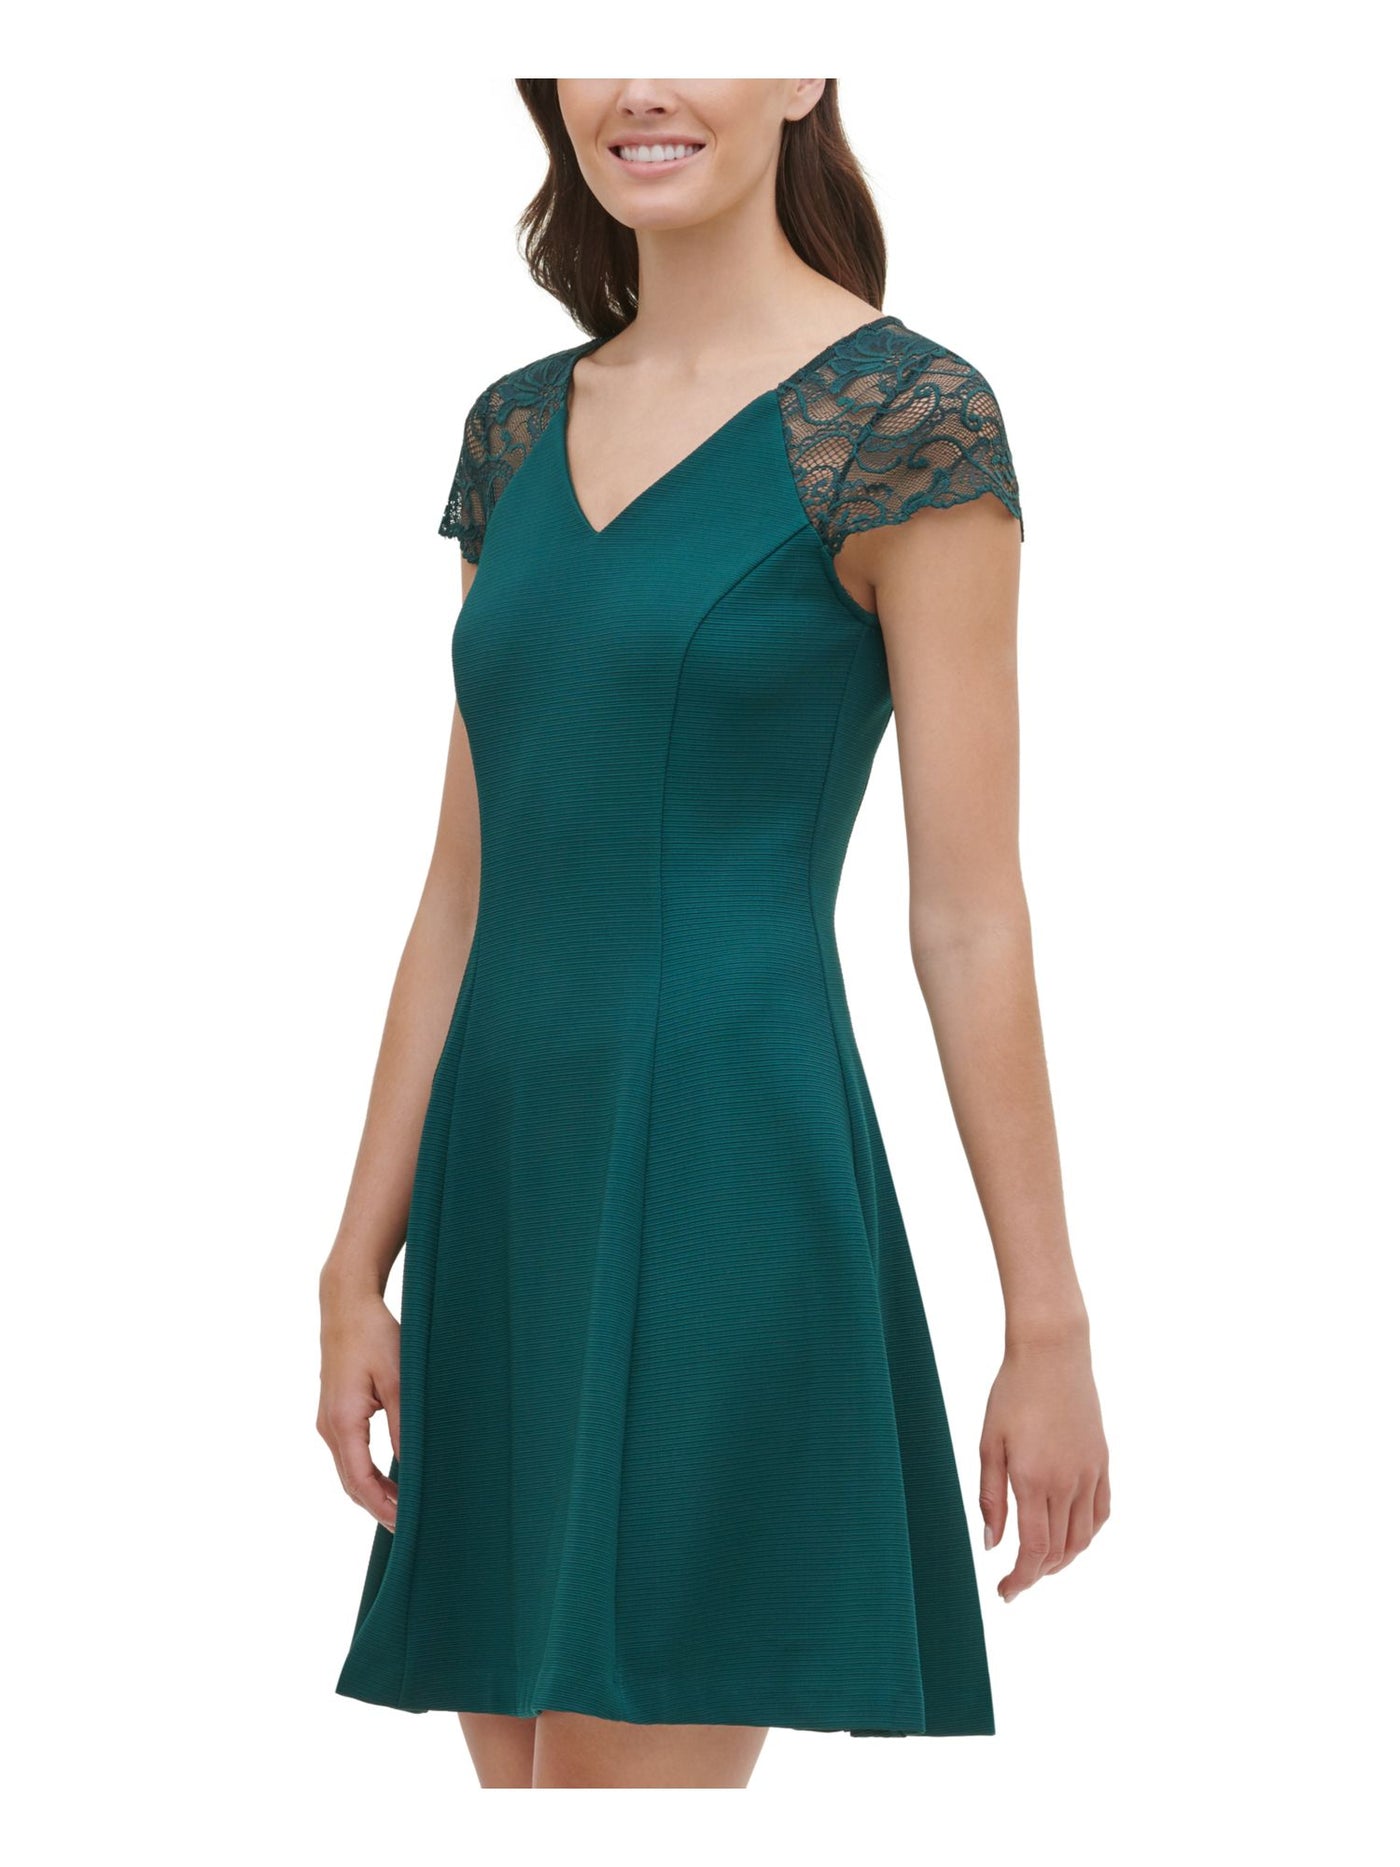 KENSIE Womens Green Stretch Lace Ribbed Zippered Cap Sleeve V Neck Short Party Fit + Flare Dress 14